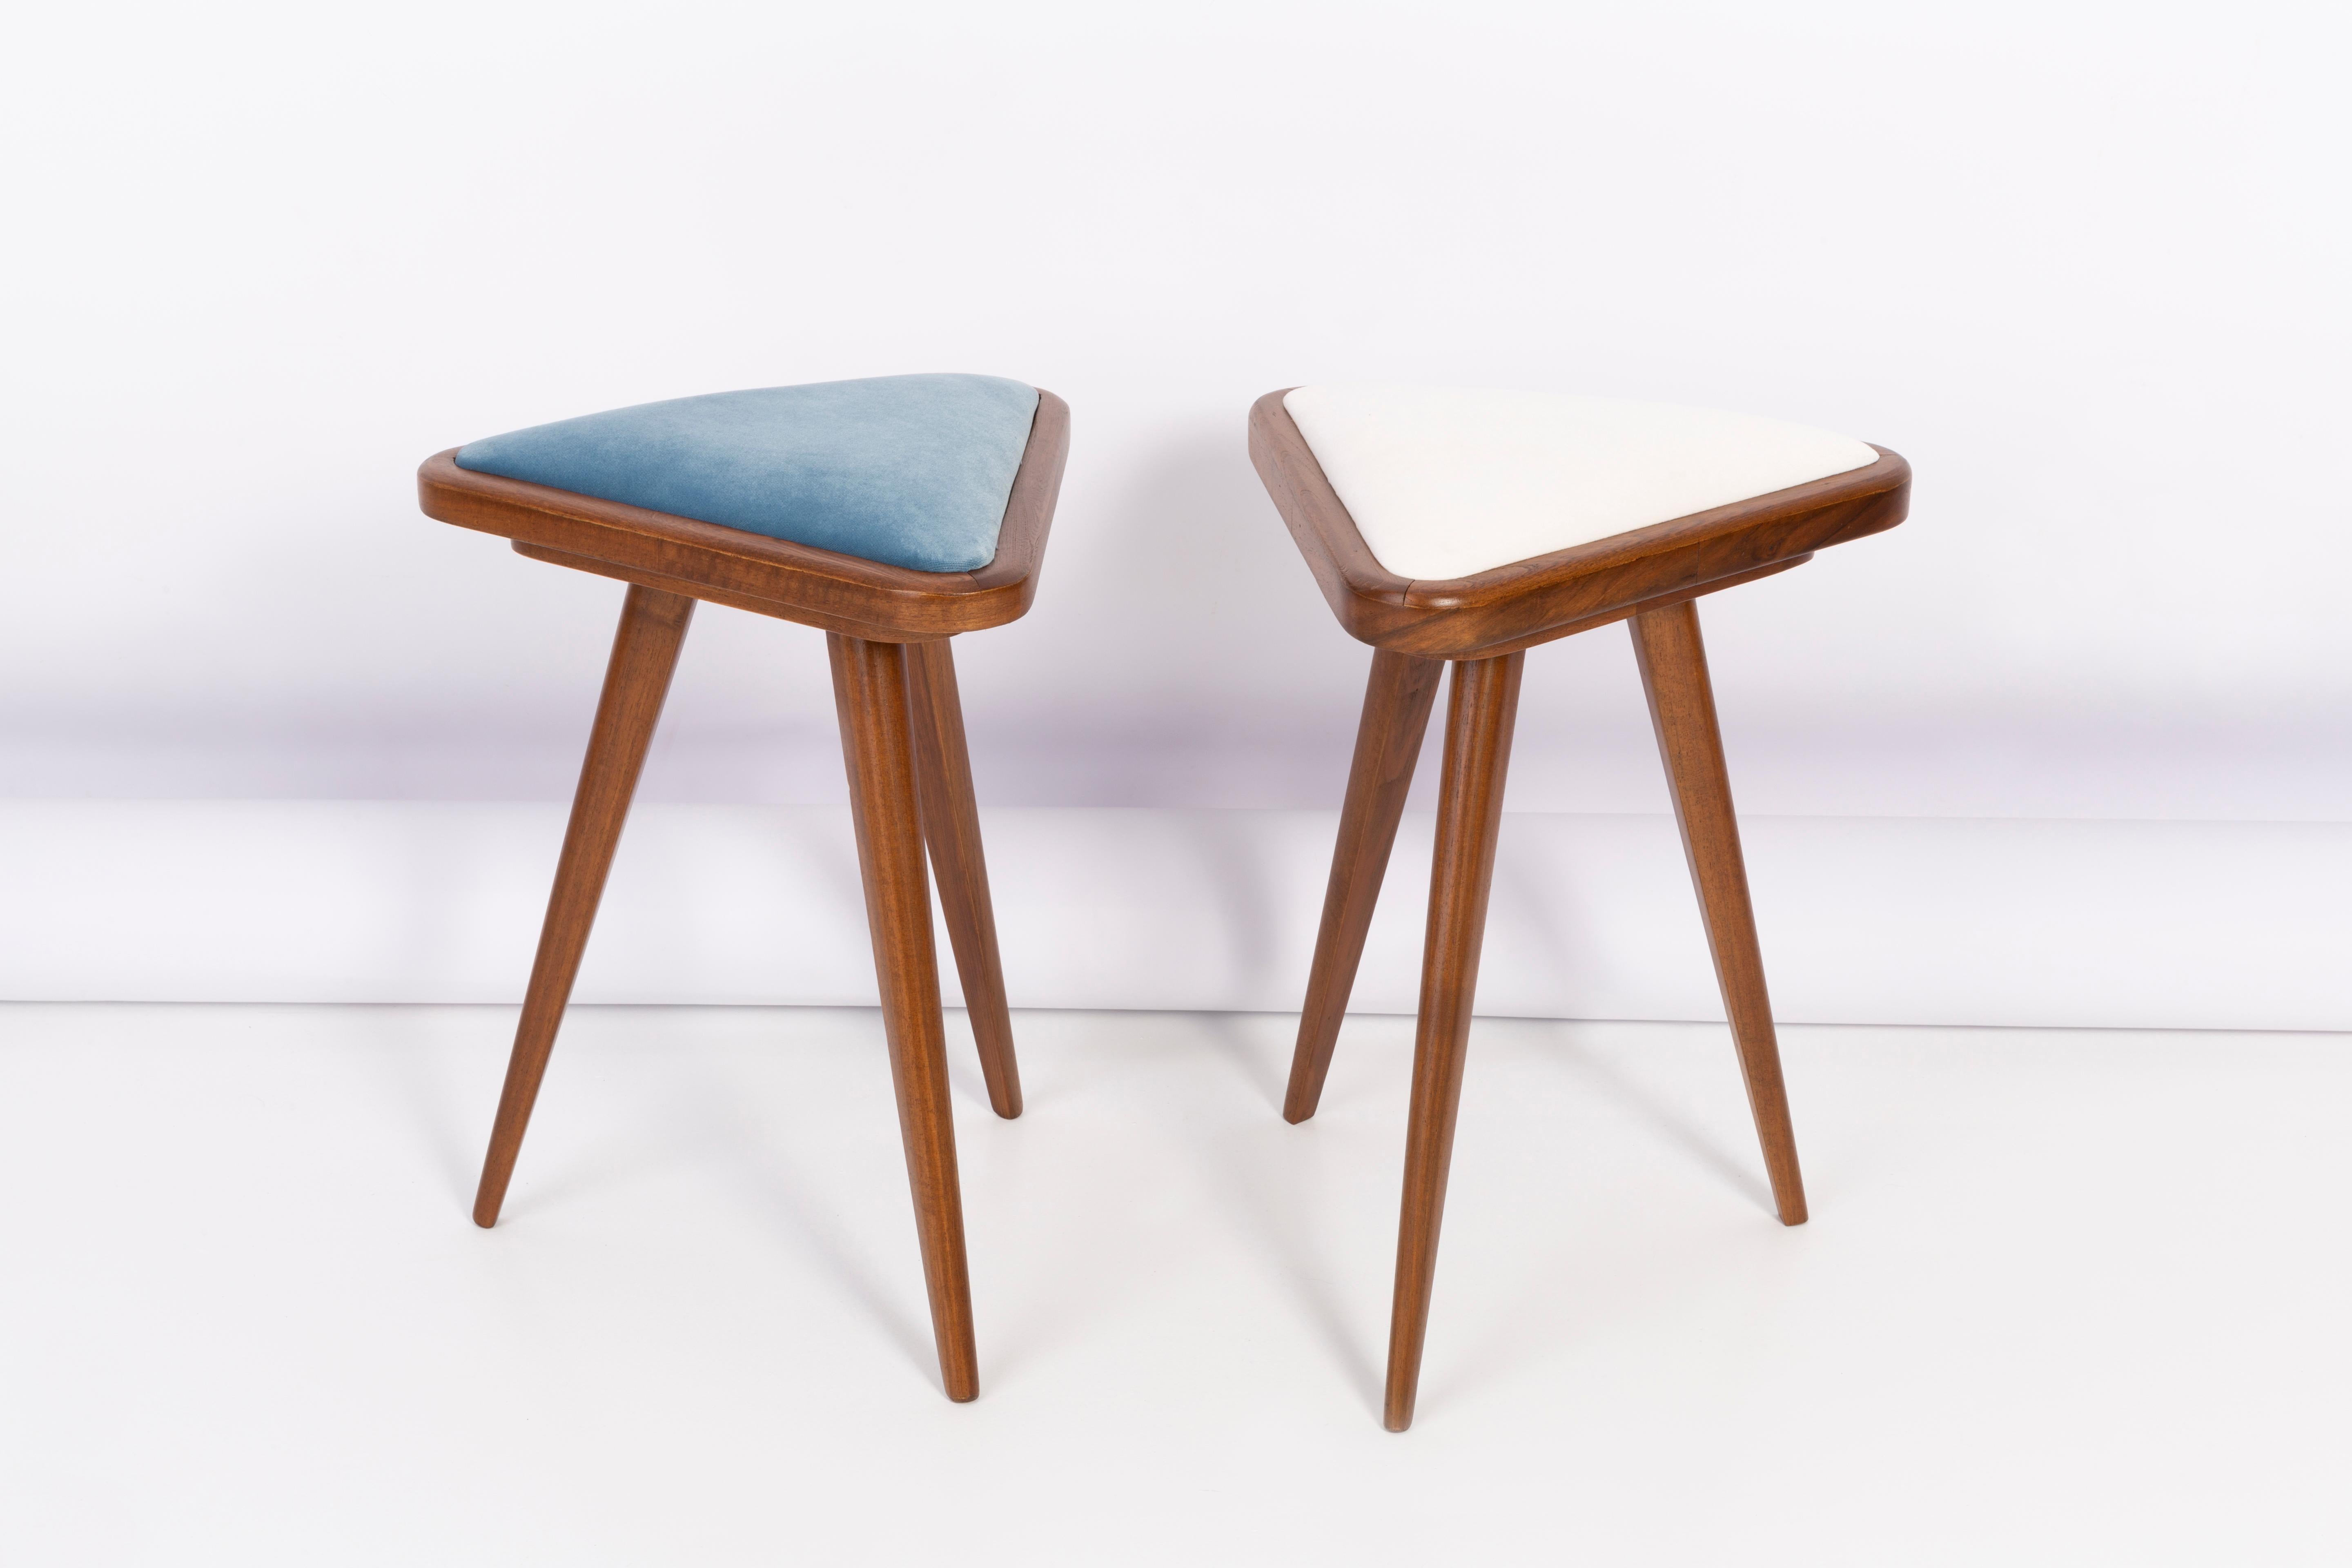 Stools from the turn of the 1960s and 1970s. Beautiful velour upholstery in 2 different colors. The stools consists of an upholstered part, a seat and wooden legs narrowing downwards, characteristic of the 1960s style. They are absolutely